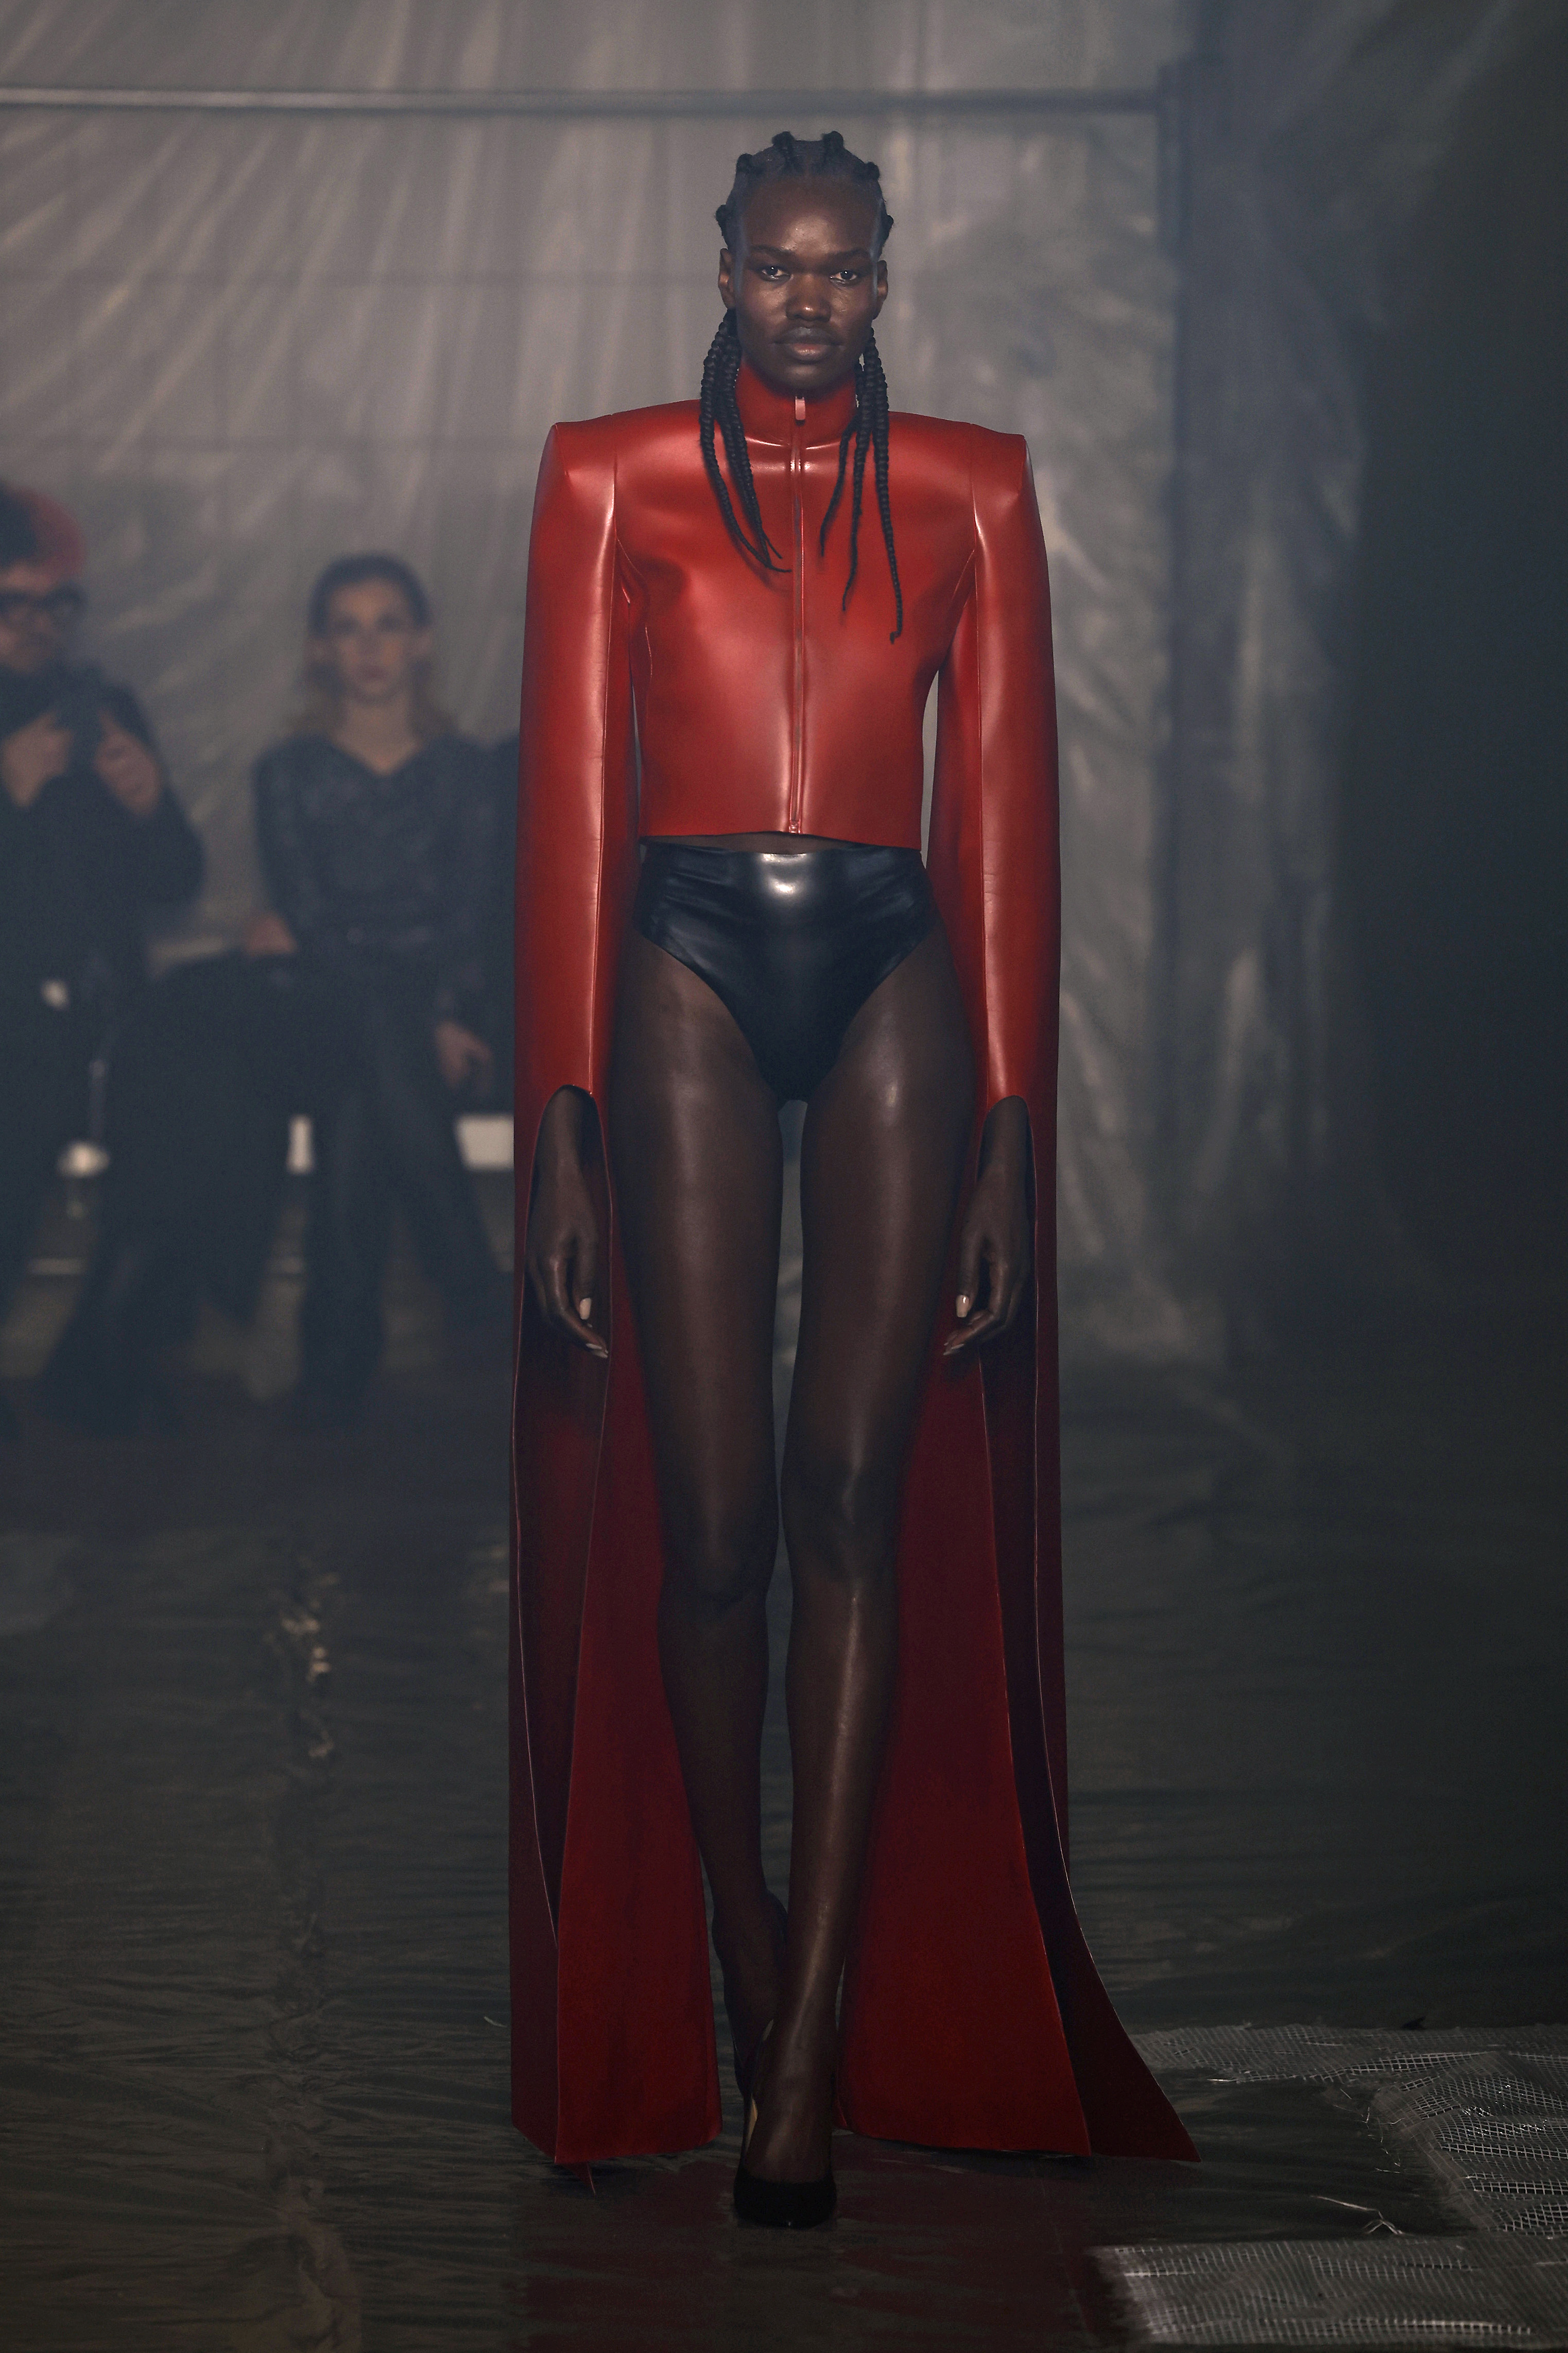 <div>'Ready-to-wear' Diablo 4 clothes at Milan Fashion Week seem unwearable, have nothing to do with Diablo 4</div>